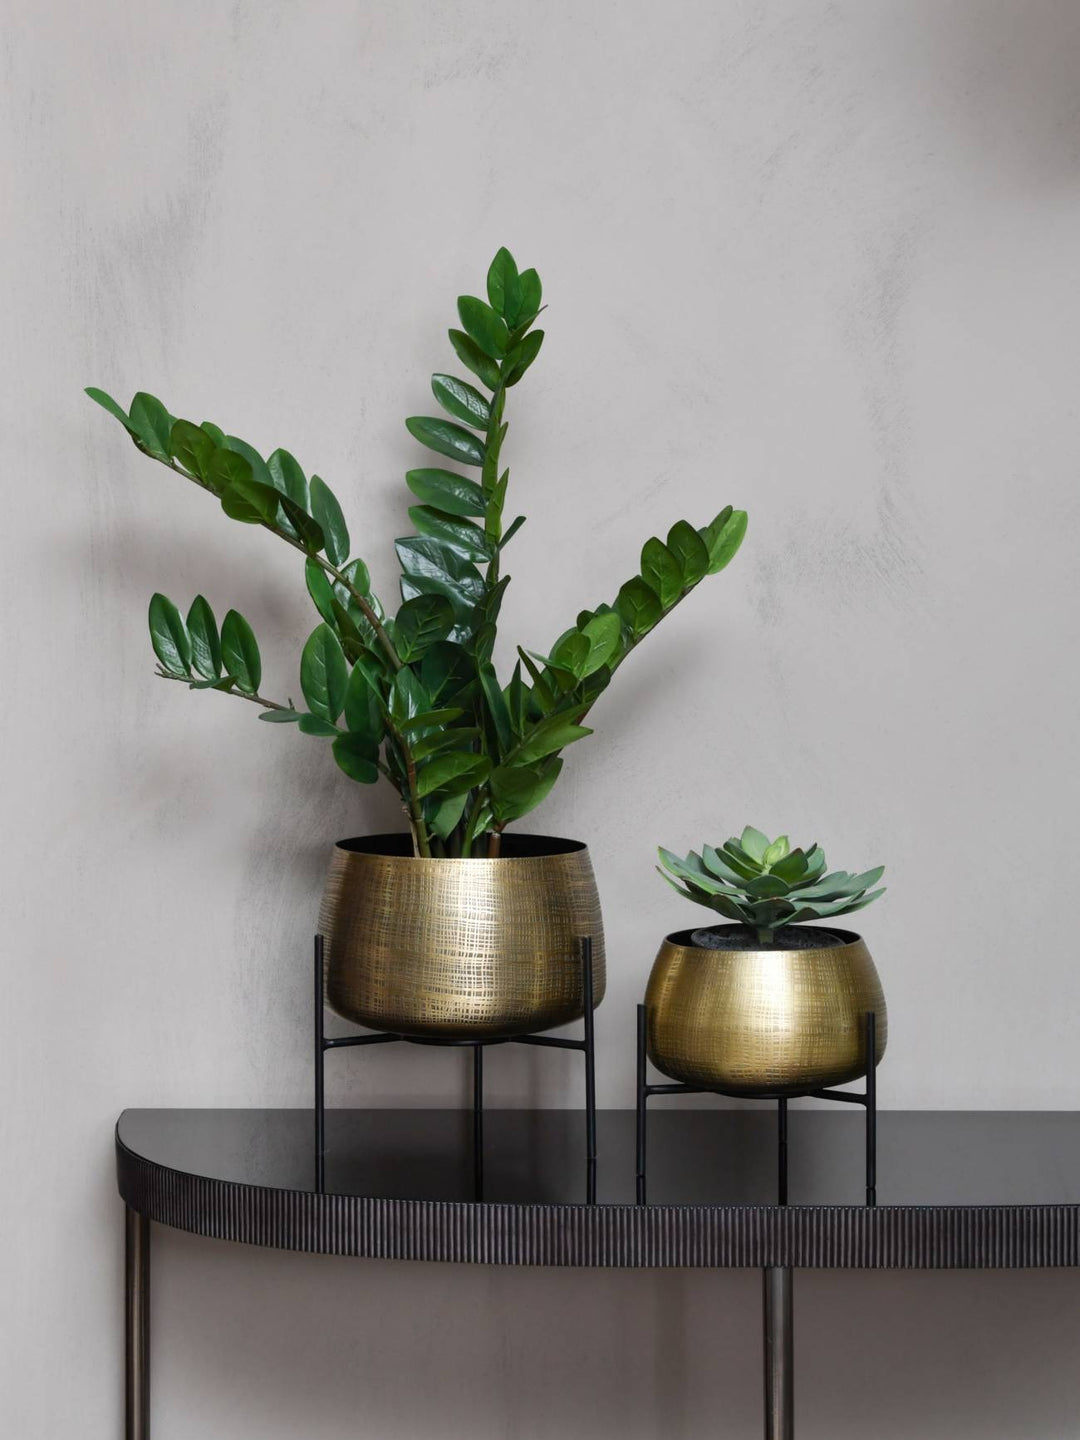 Libra Interiors Clyde Tabletop Planters in Antique Brass – Set of 2